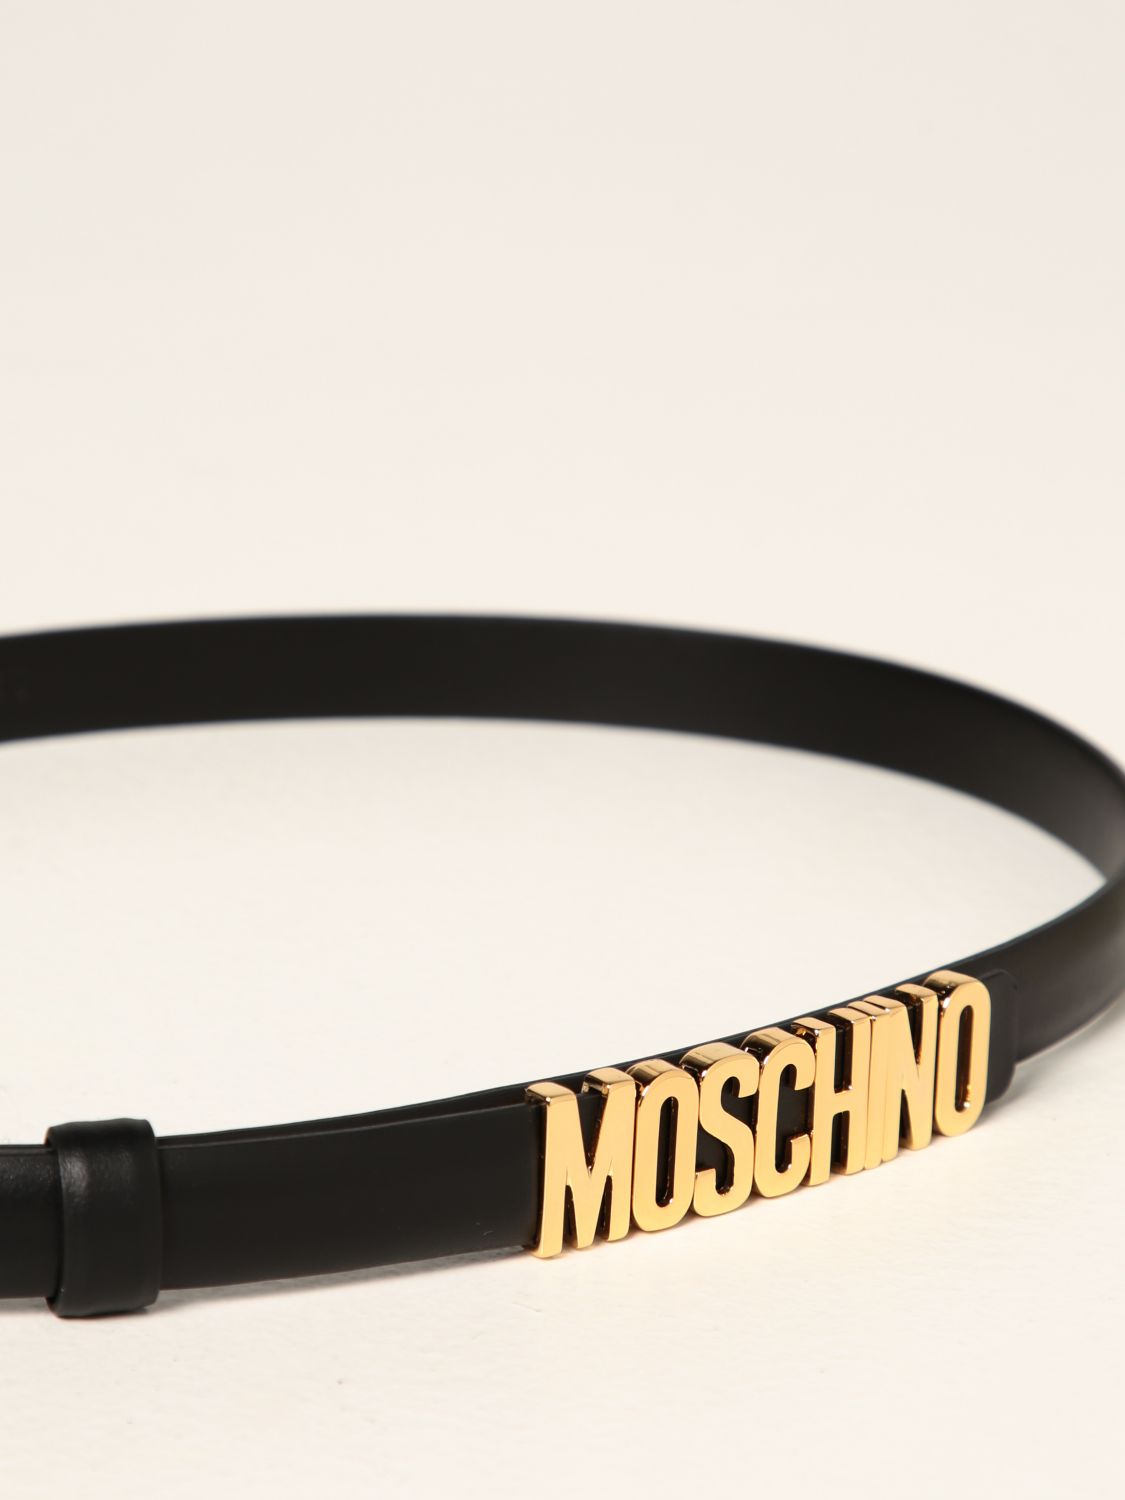 MOSCHINO COUTURE: leather belt with metallic logo - Black 2 | Belt ...